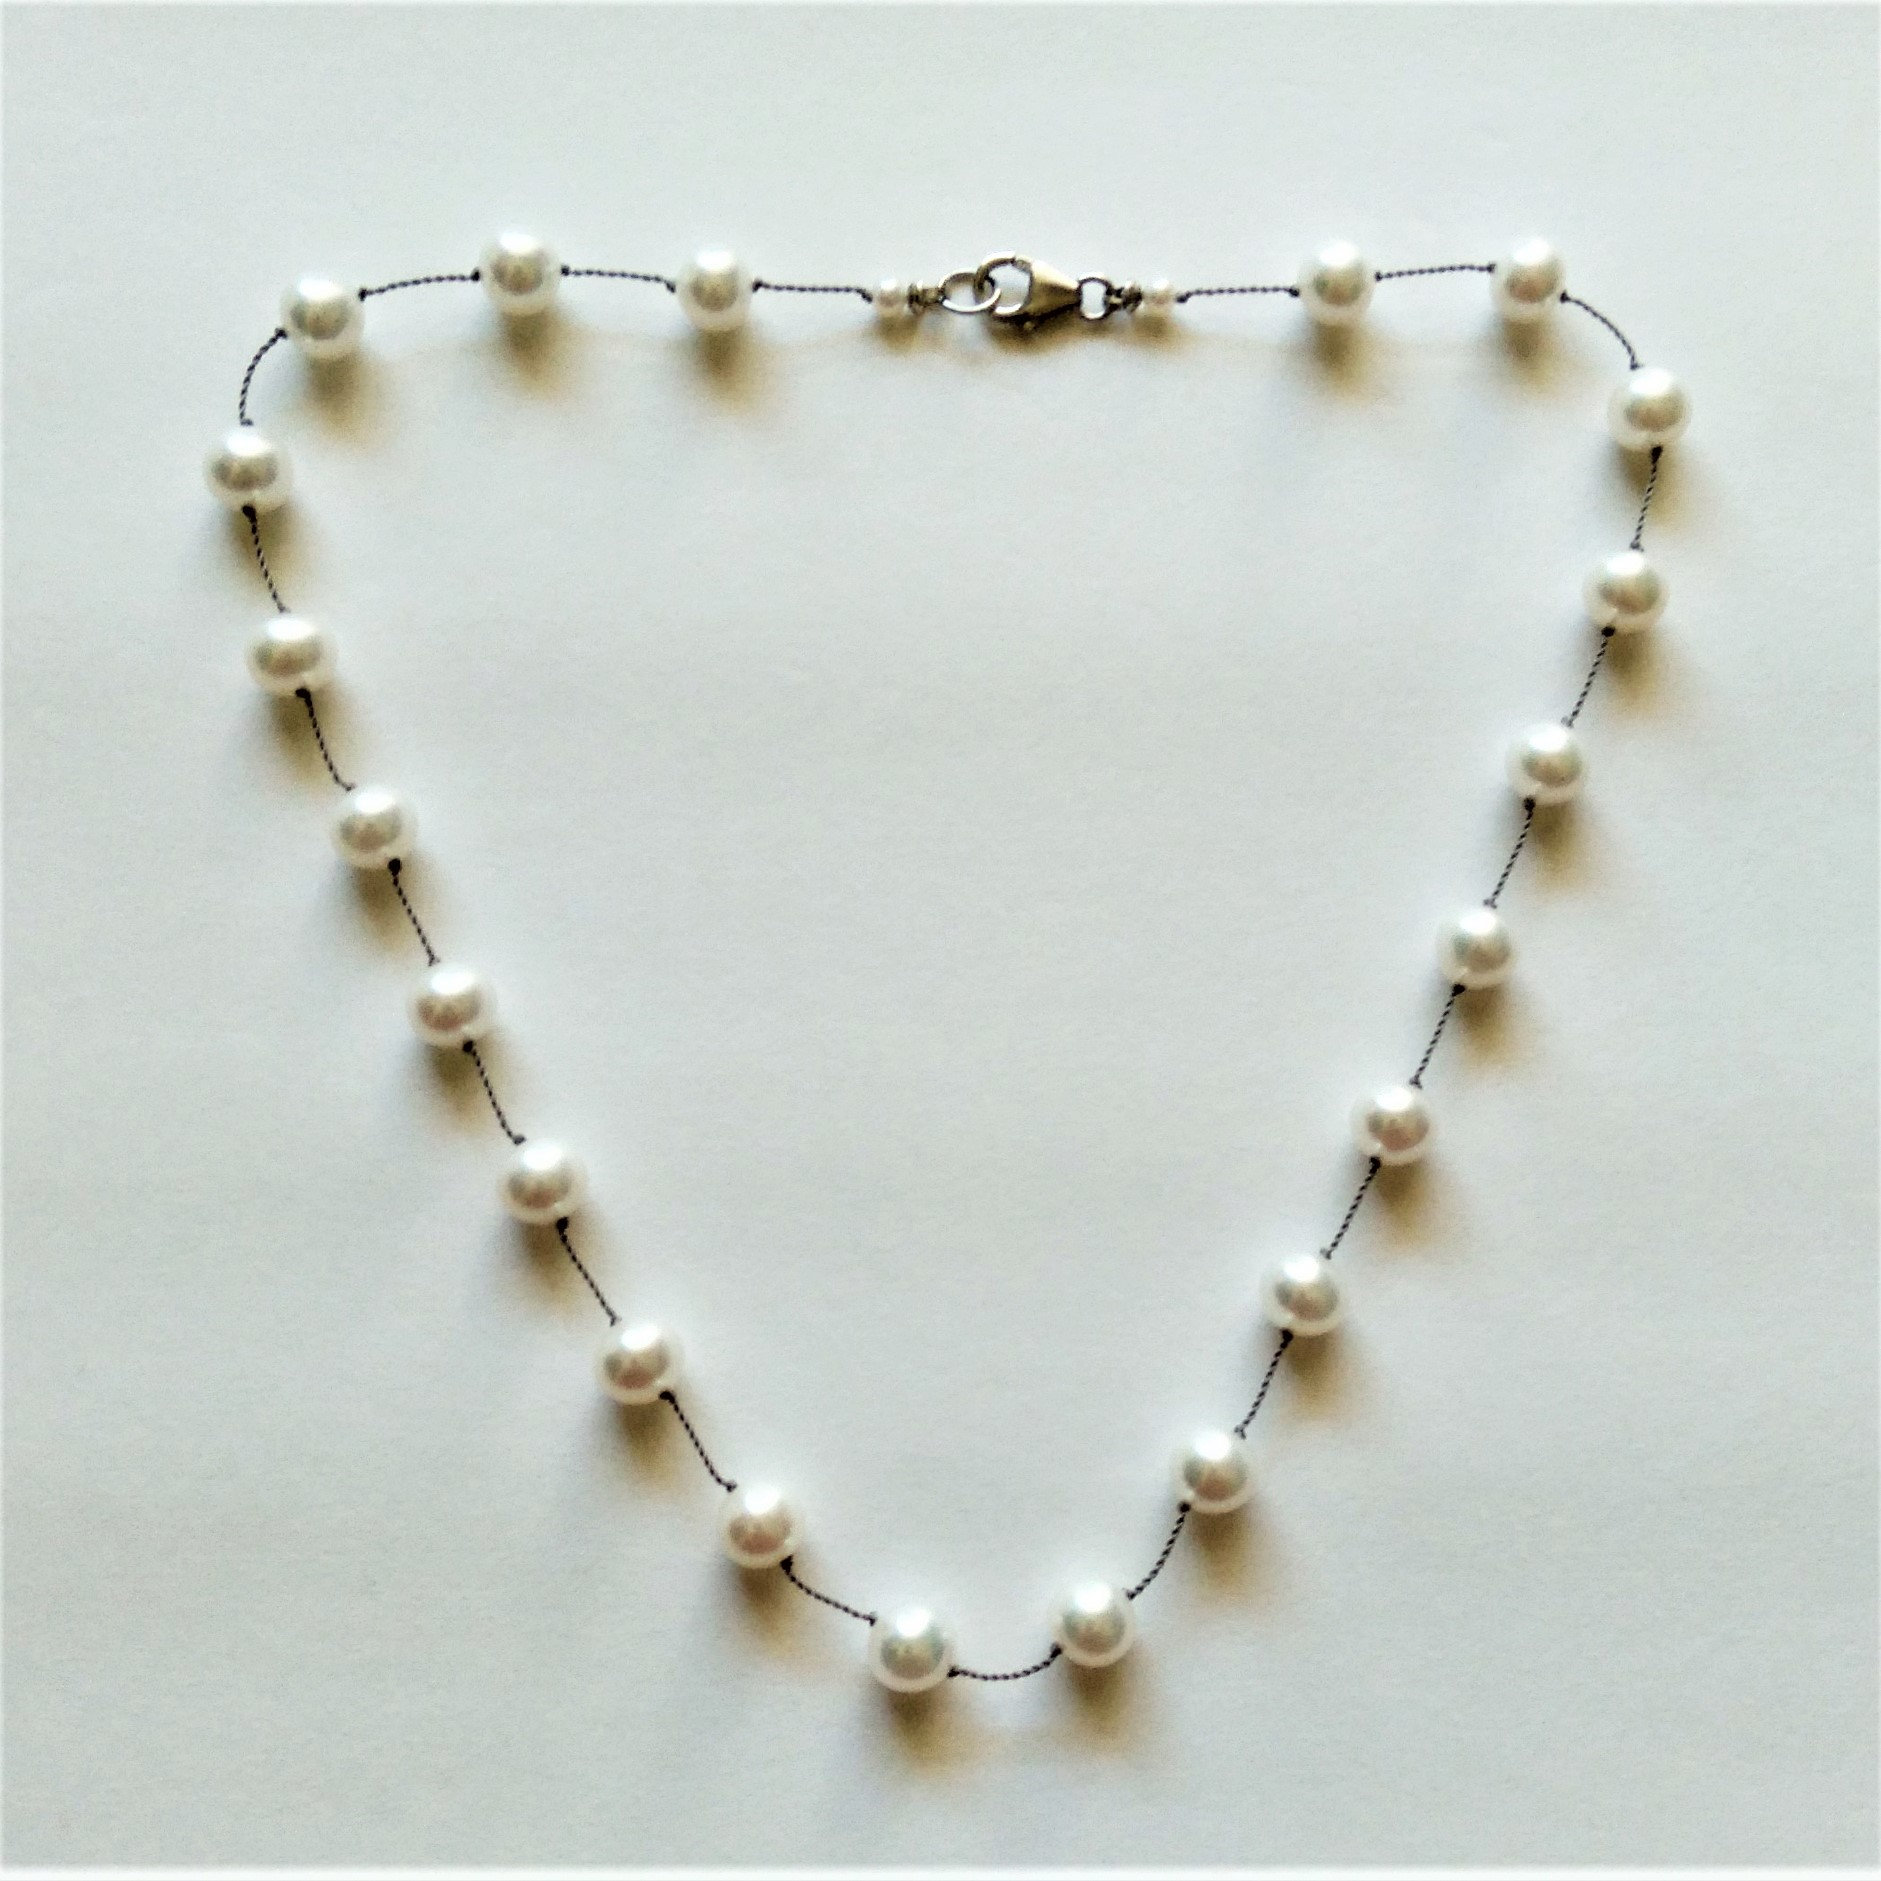 Silk Tin Cup Necklace | Instagram pearls, Pearl company, Signature necklace